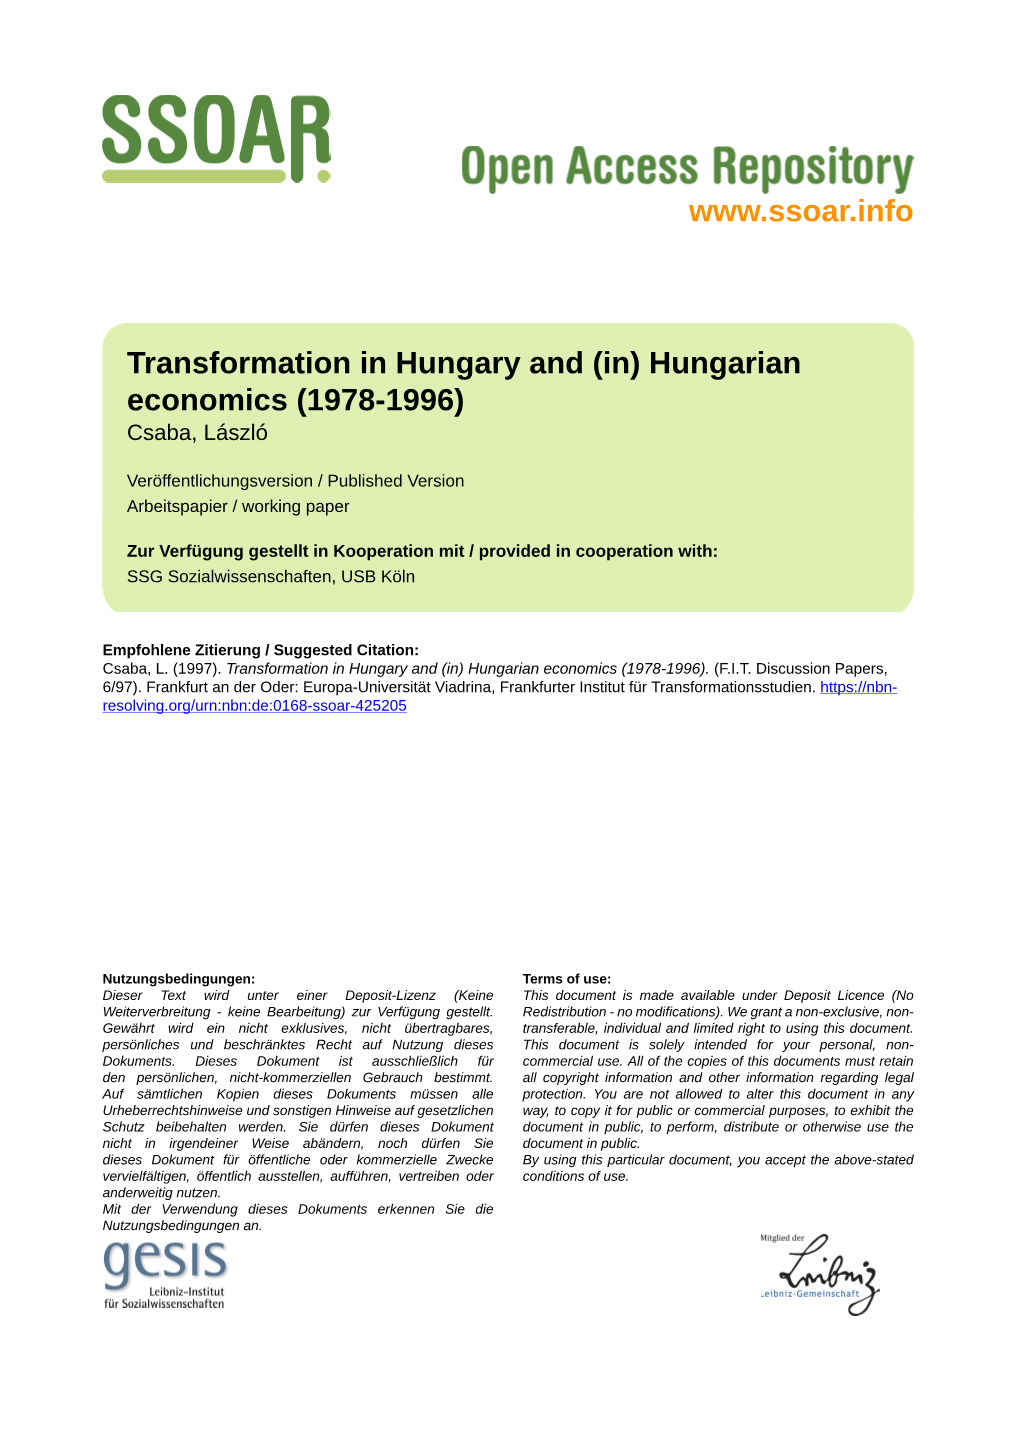 Transformation in Hungary and (In) Hungarian Economics (1978-1996) Csaba, László